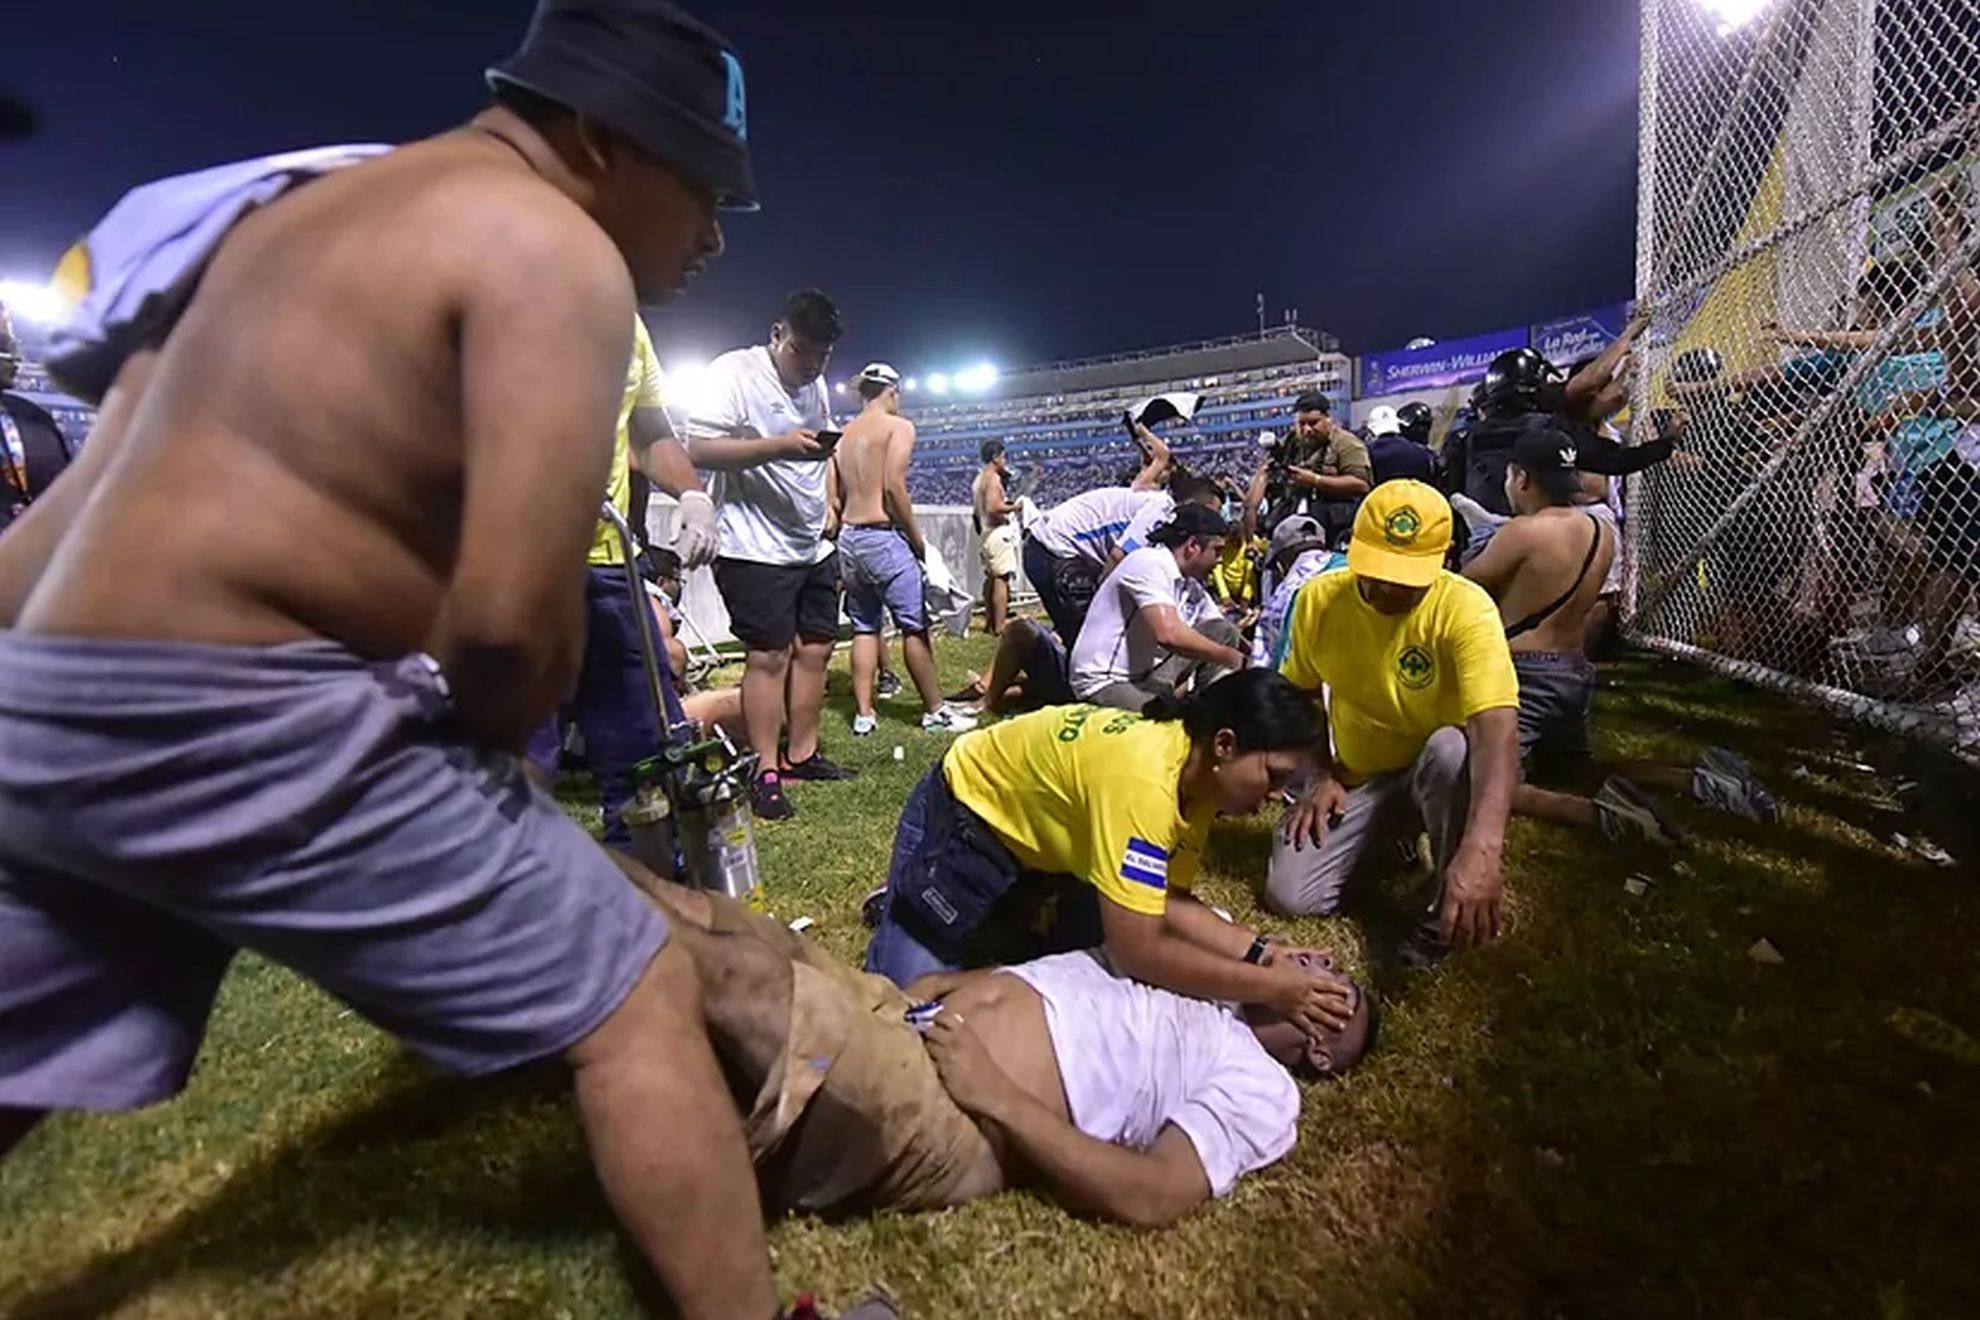 Heart-breaking account from the stadium disaster in El Salvador: People couldn't breathe and forced their way in